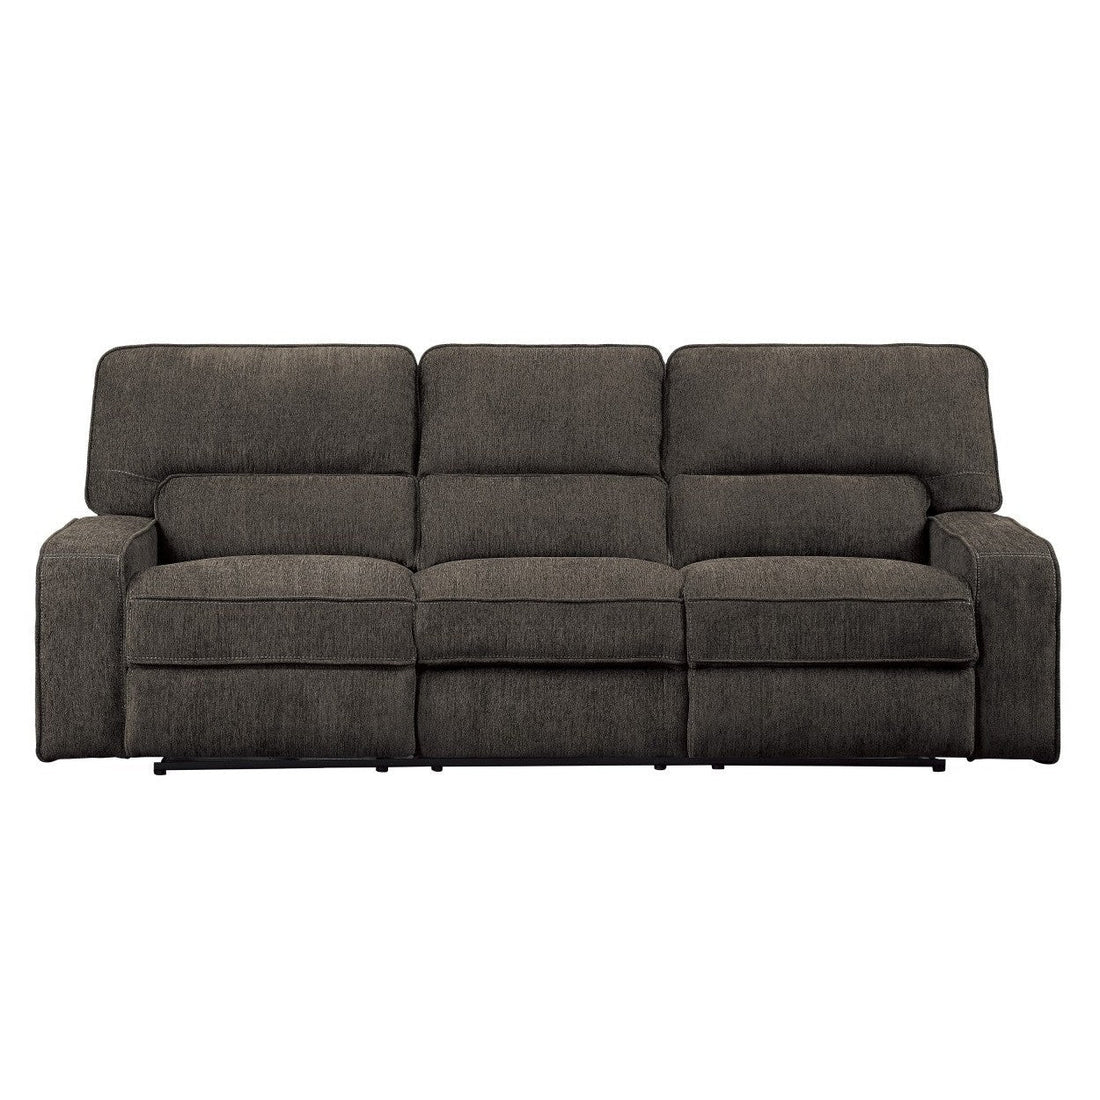 DOUBLE RECLINING SOFA, CHOCOLATE 100% POLYESTER 9849CH-3